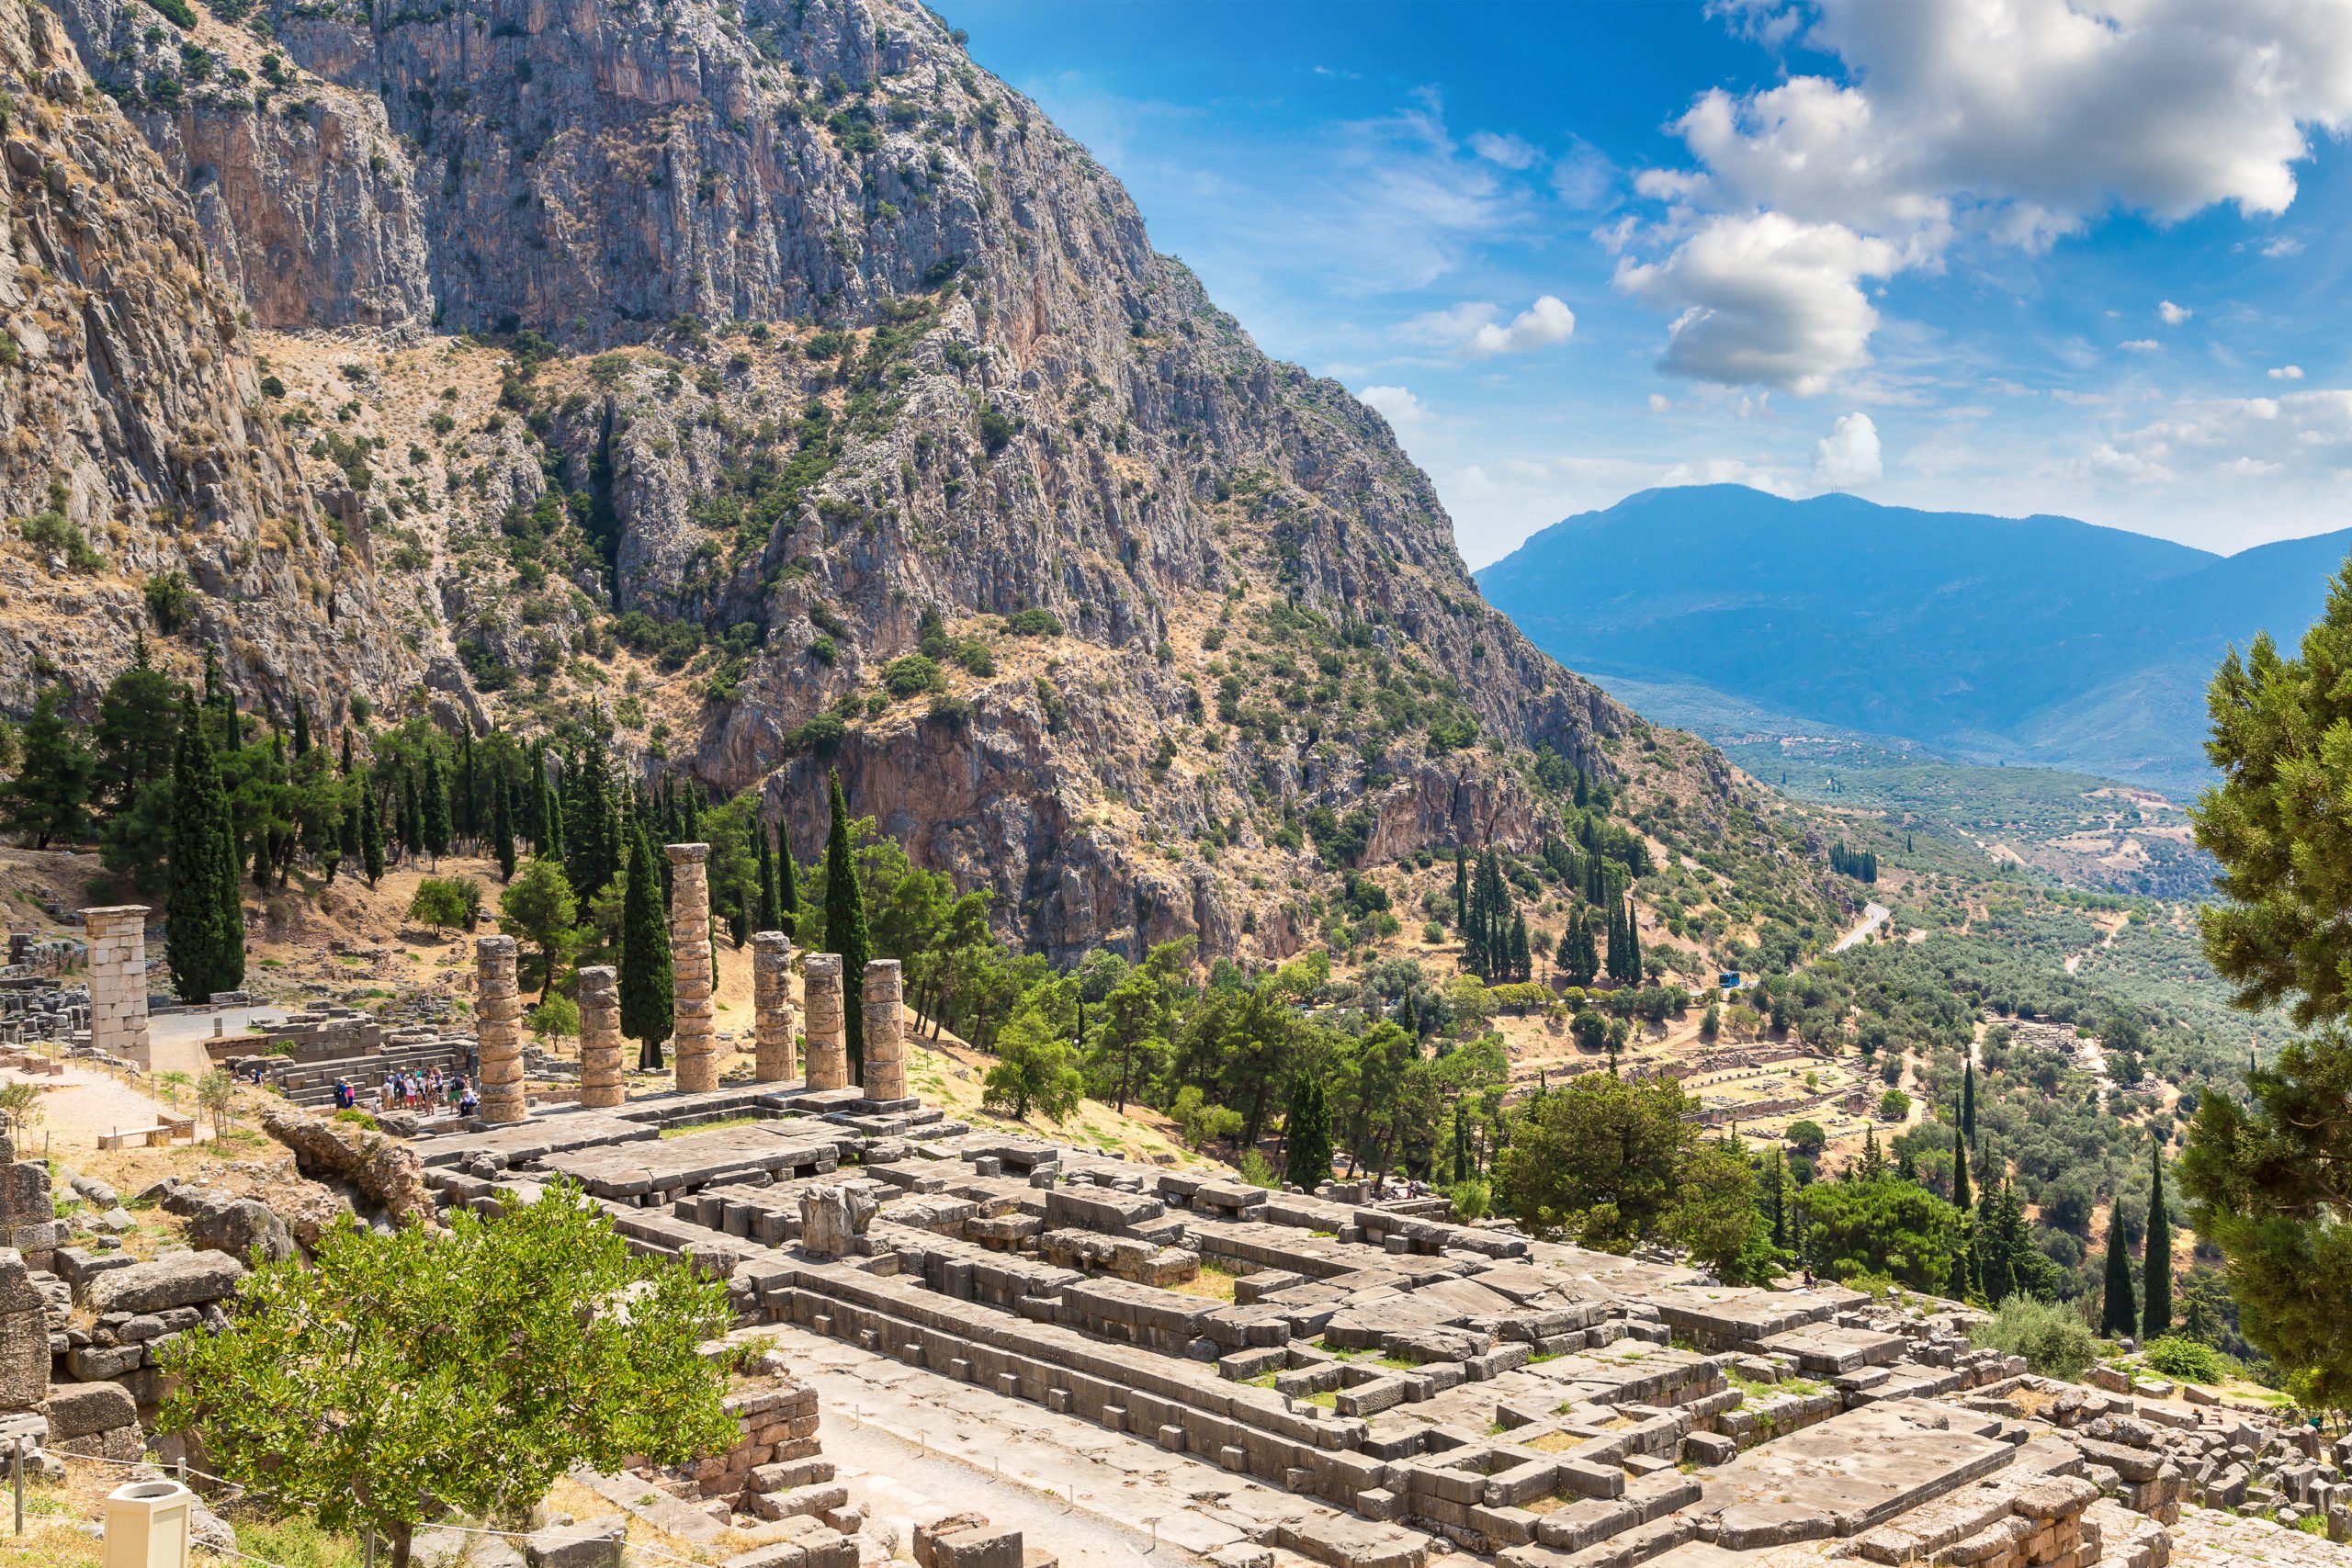 Learn About The Legends Surrounding The Oracle Of Delphi And The Temple Of Apollon On The Delphi Tour From Athens